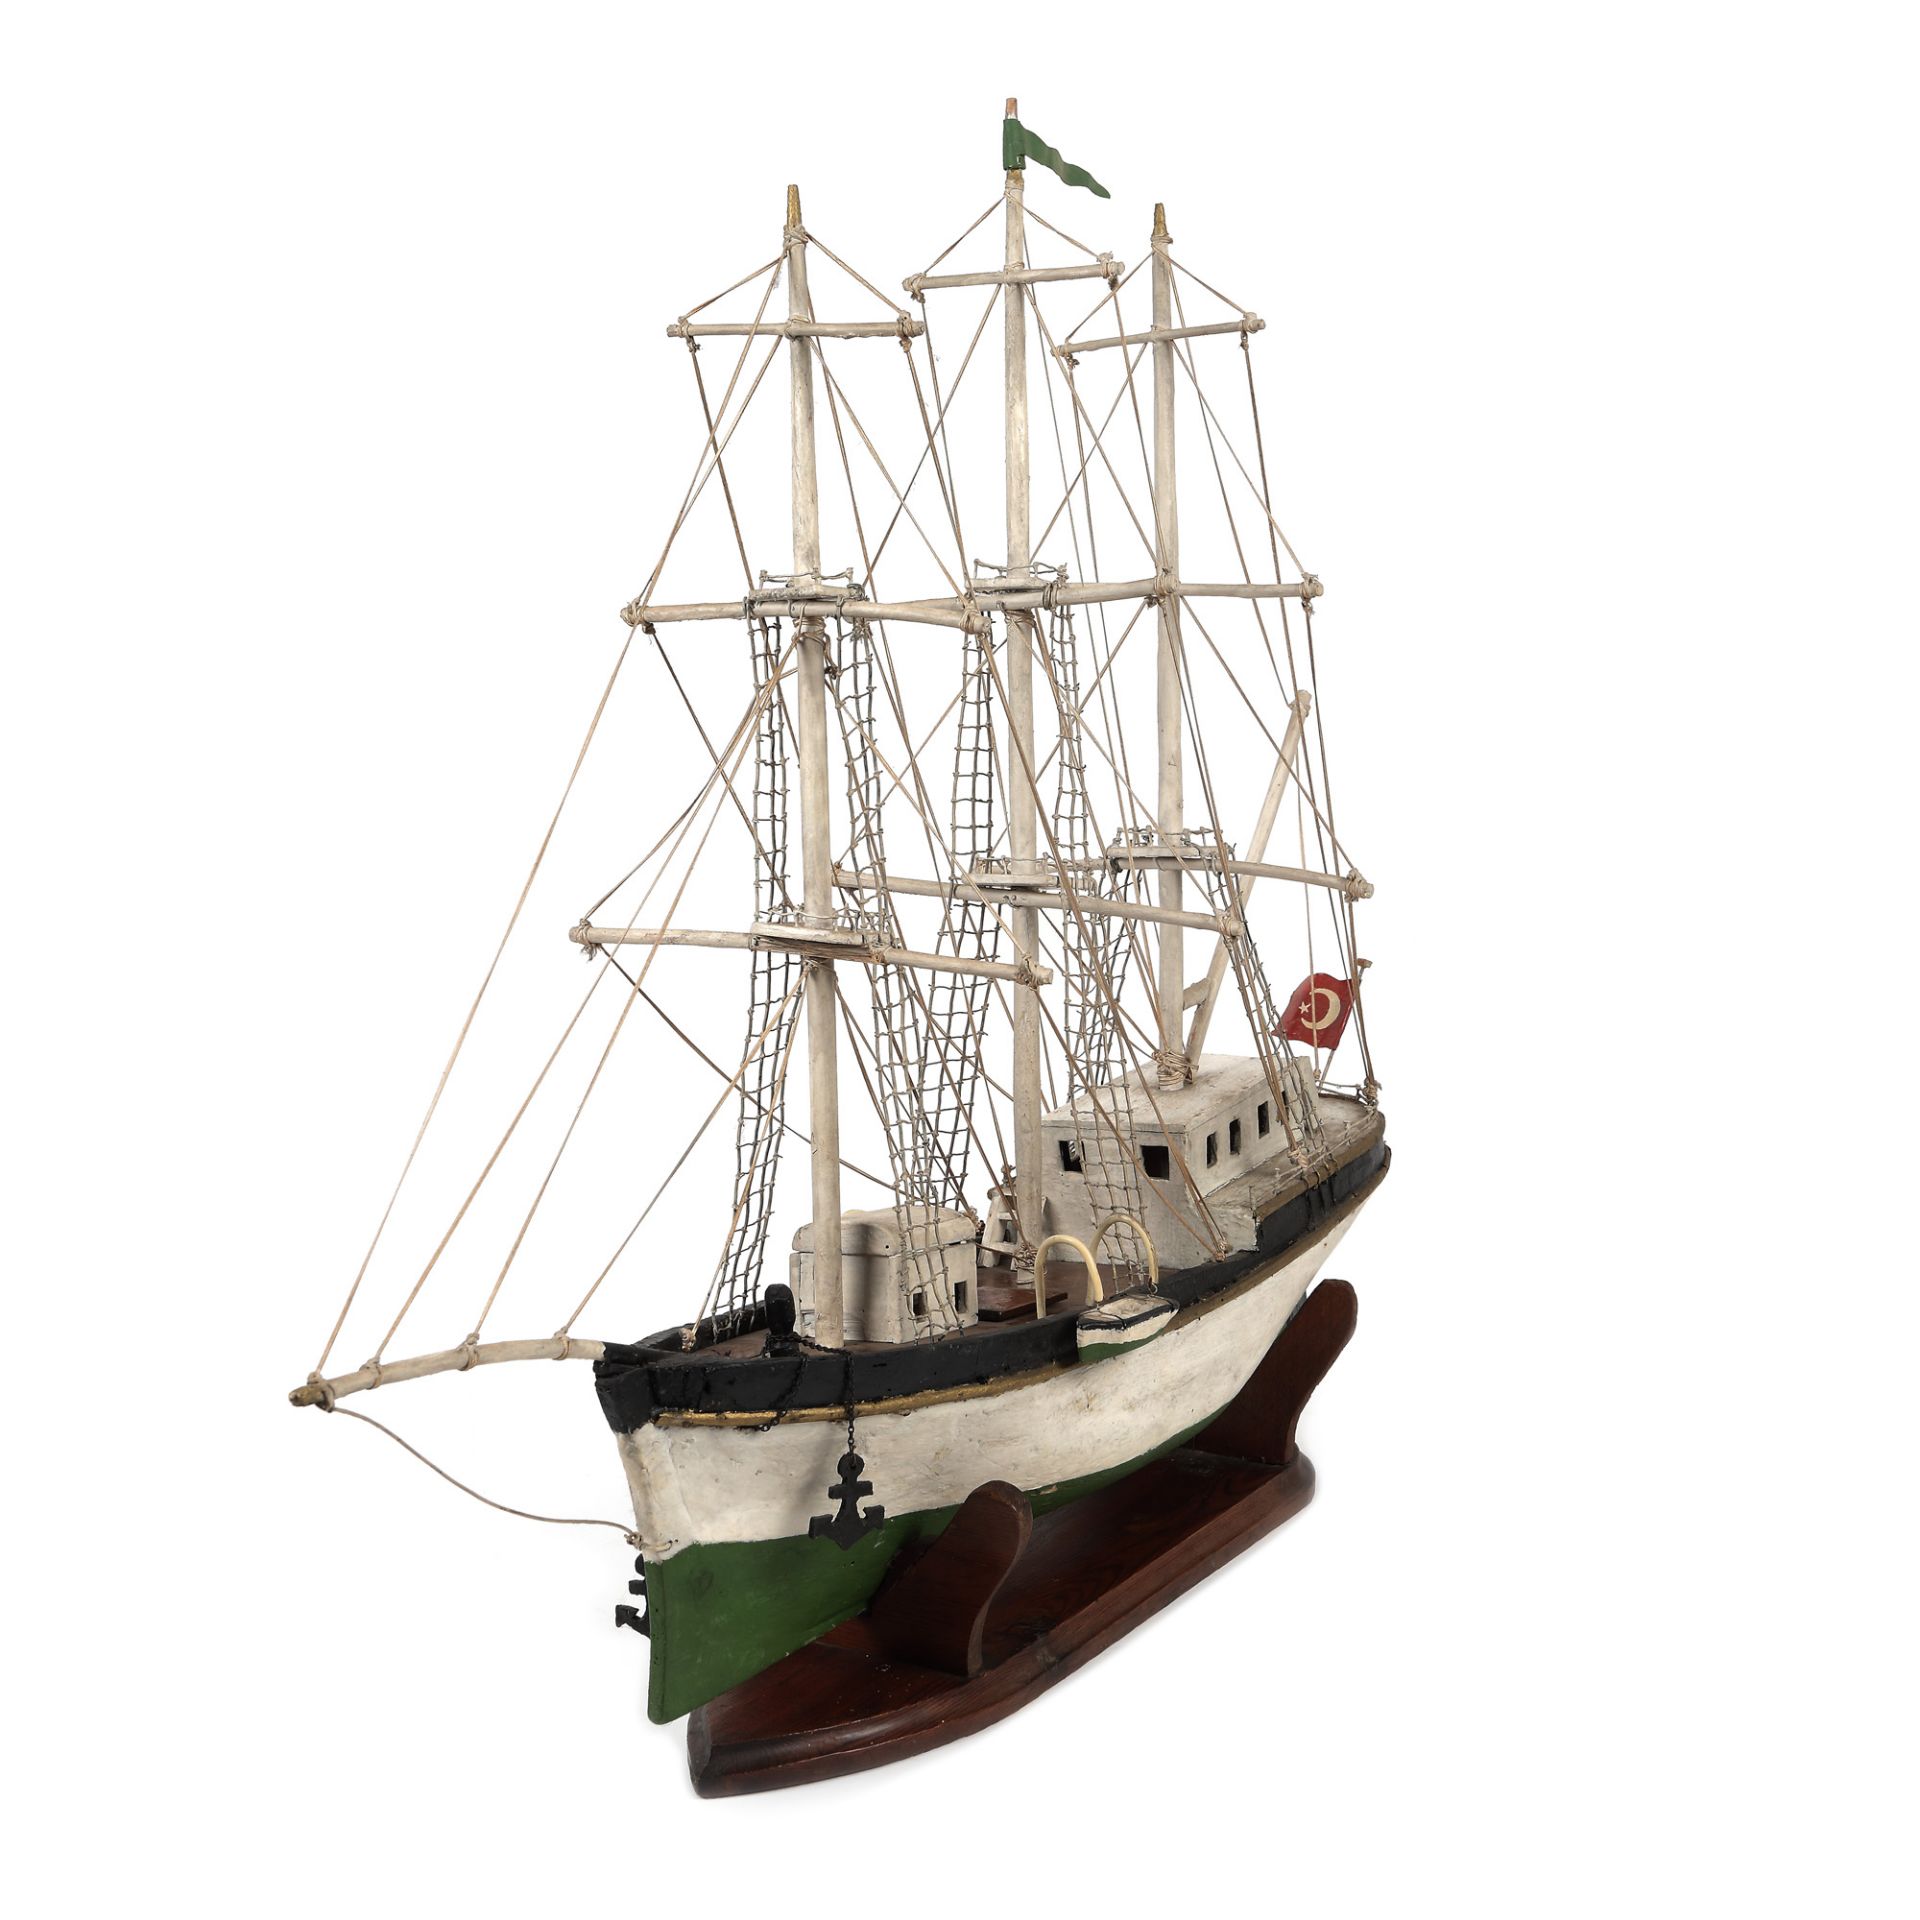 Turkish brig model, painted wood, approx. 1940-1950 - Image 4 of 4